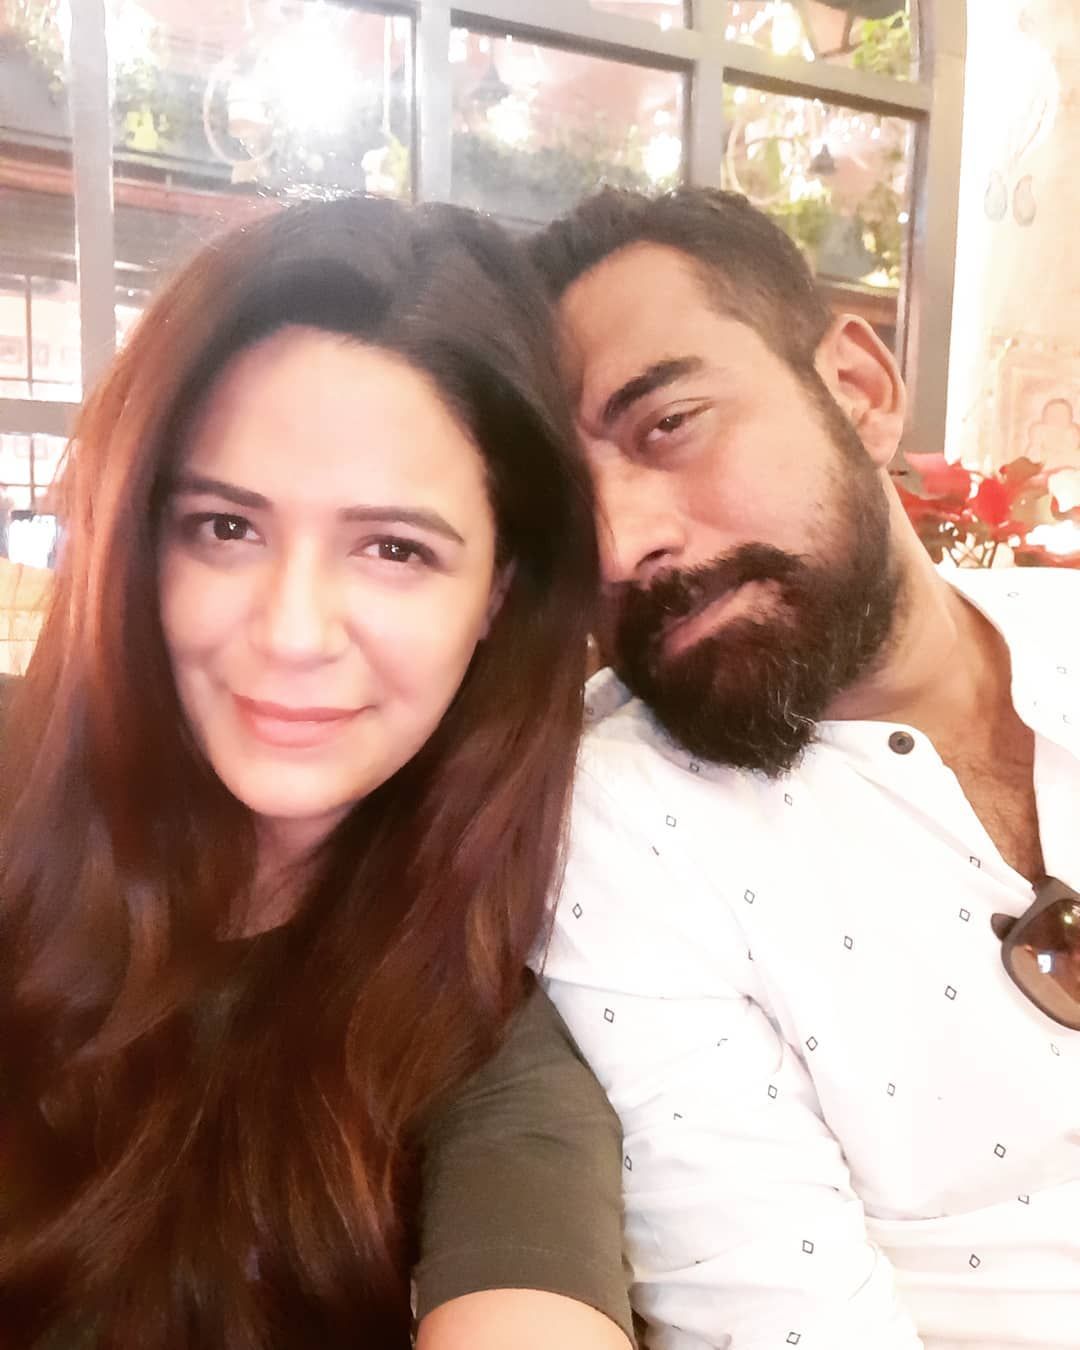 Mona Singh Talks About Her Husband's 'Super Bad' Wedding Proposal In The Middle Of Traffic With People Shouting At Them